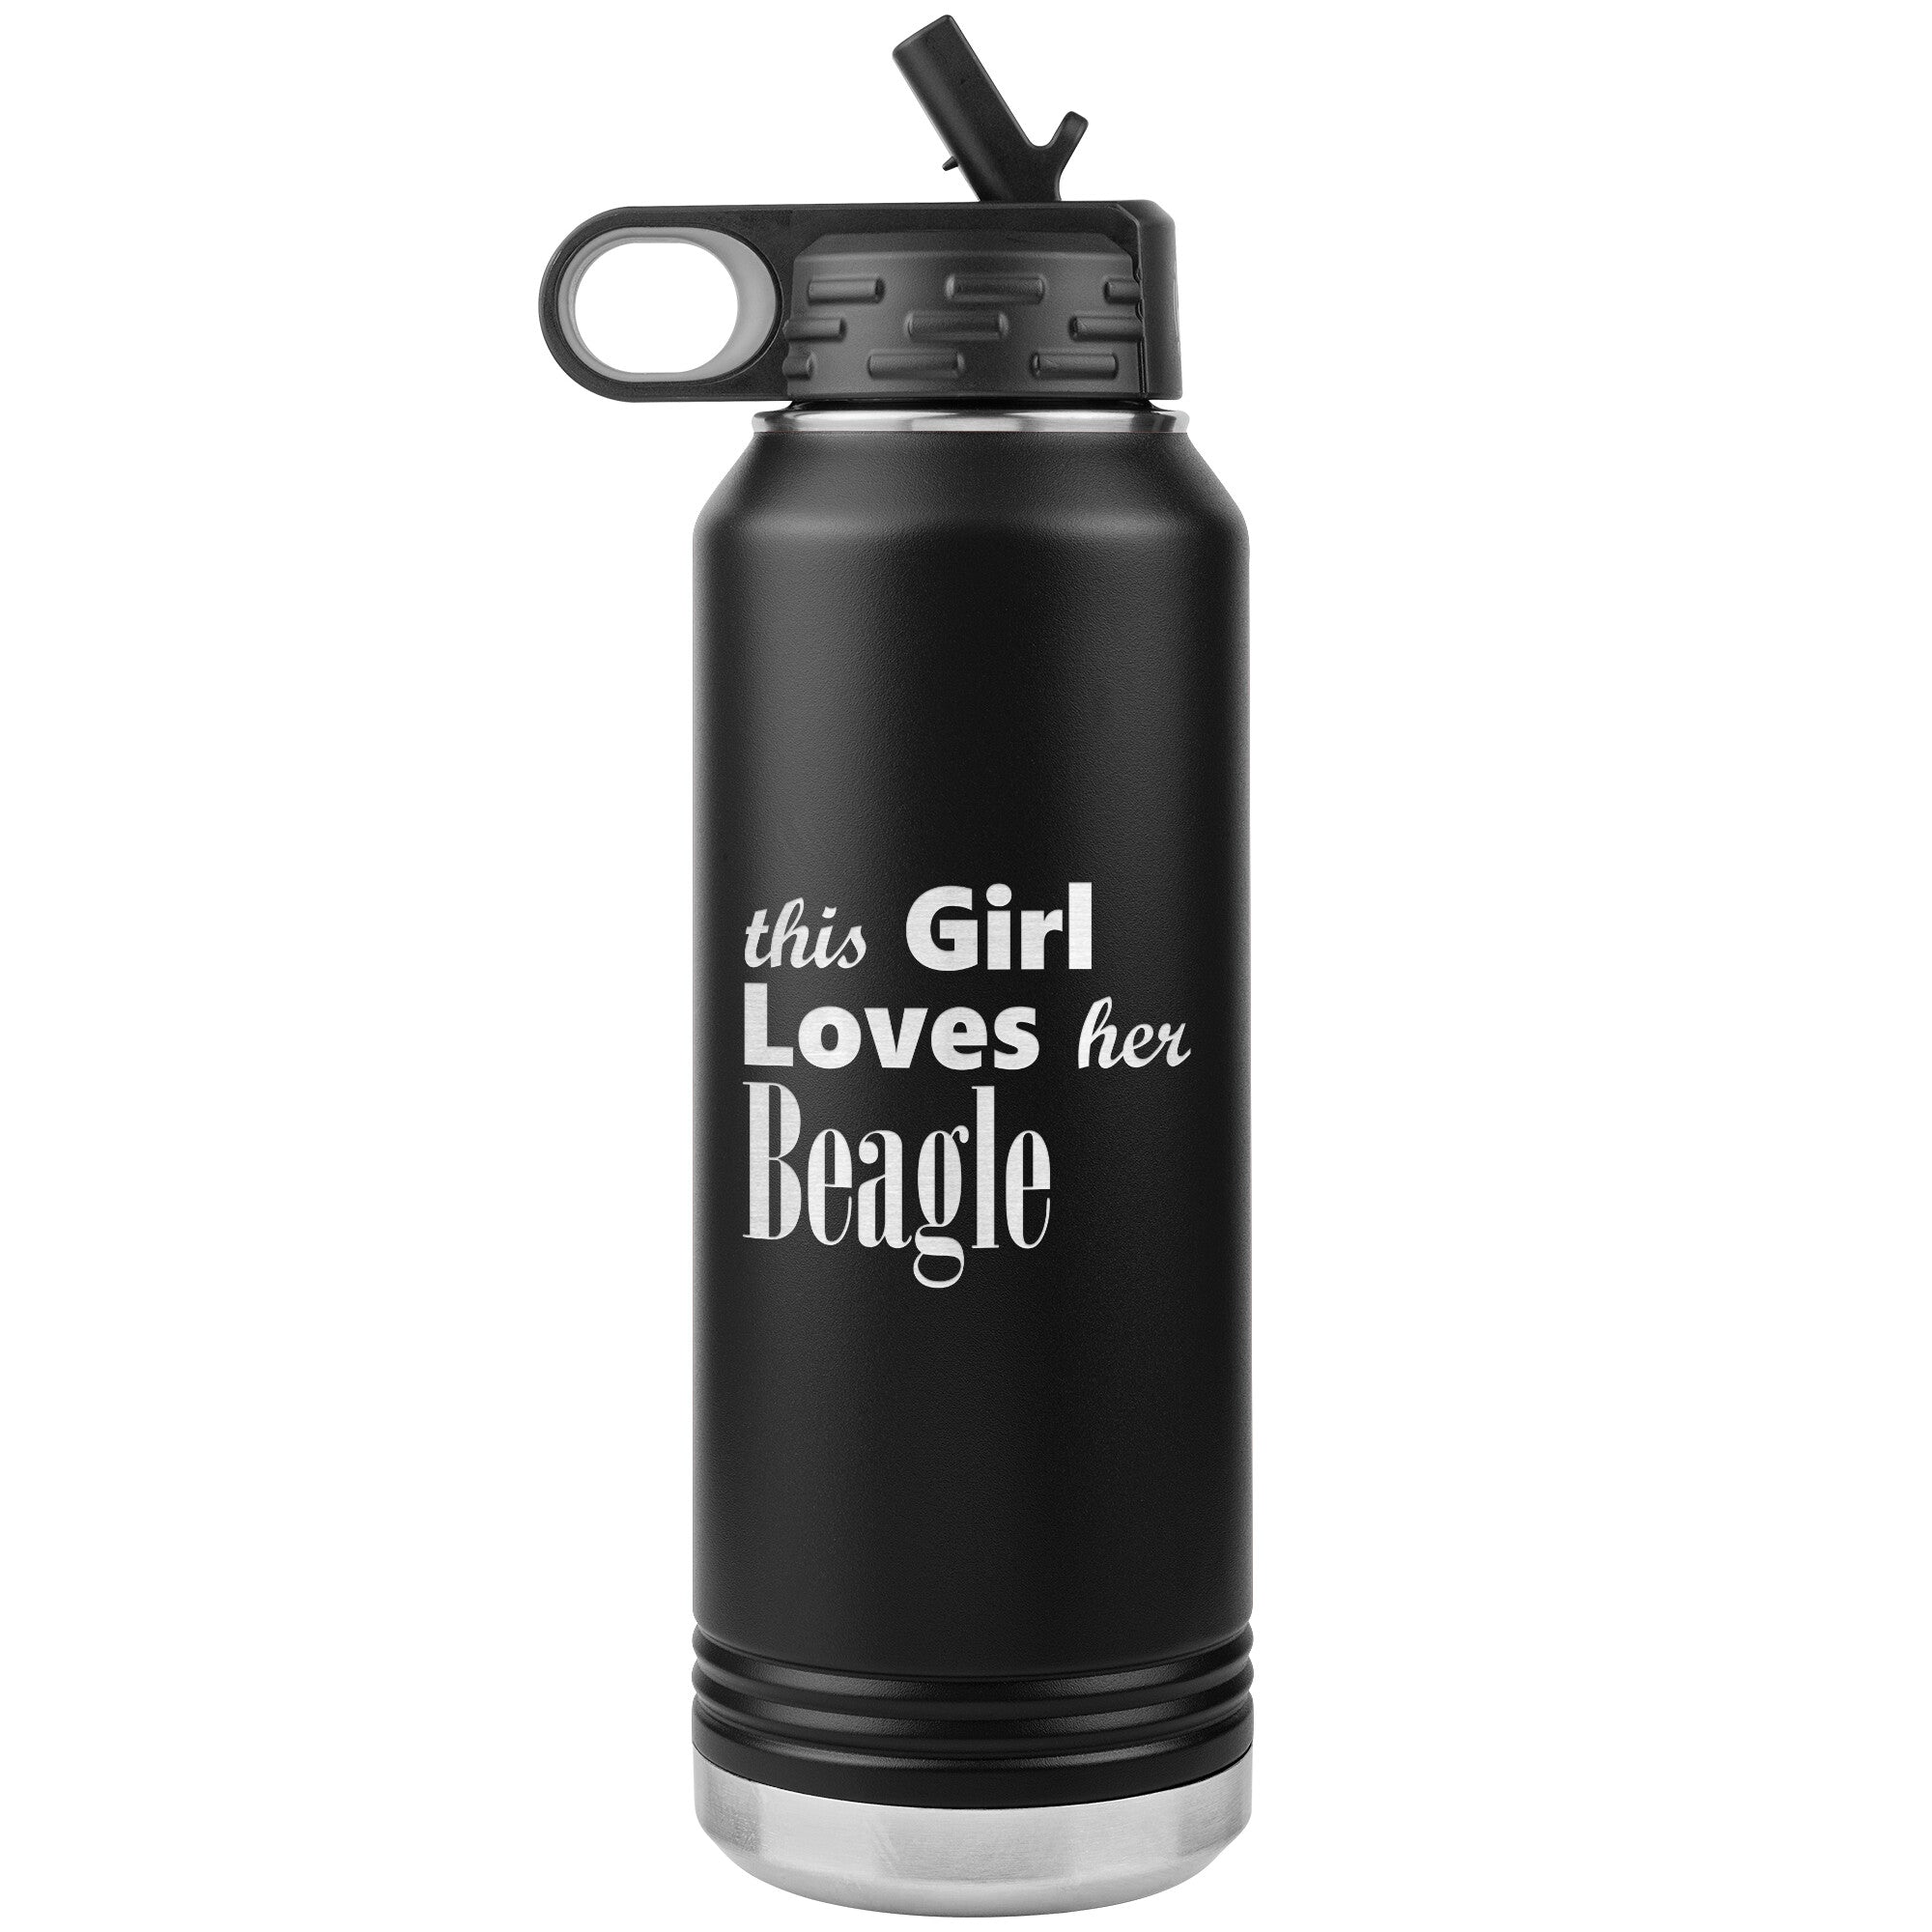 Beagle - 32oz Insulated Water Bottle